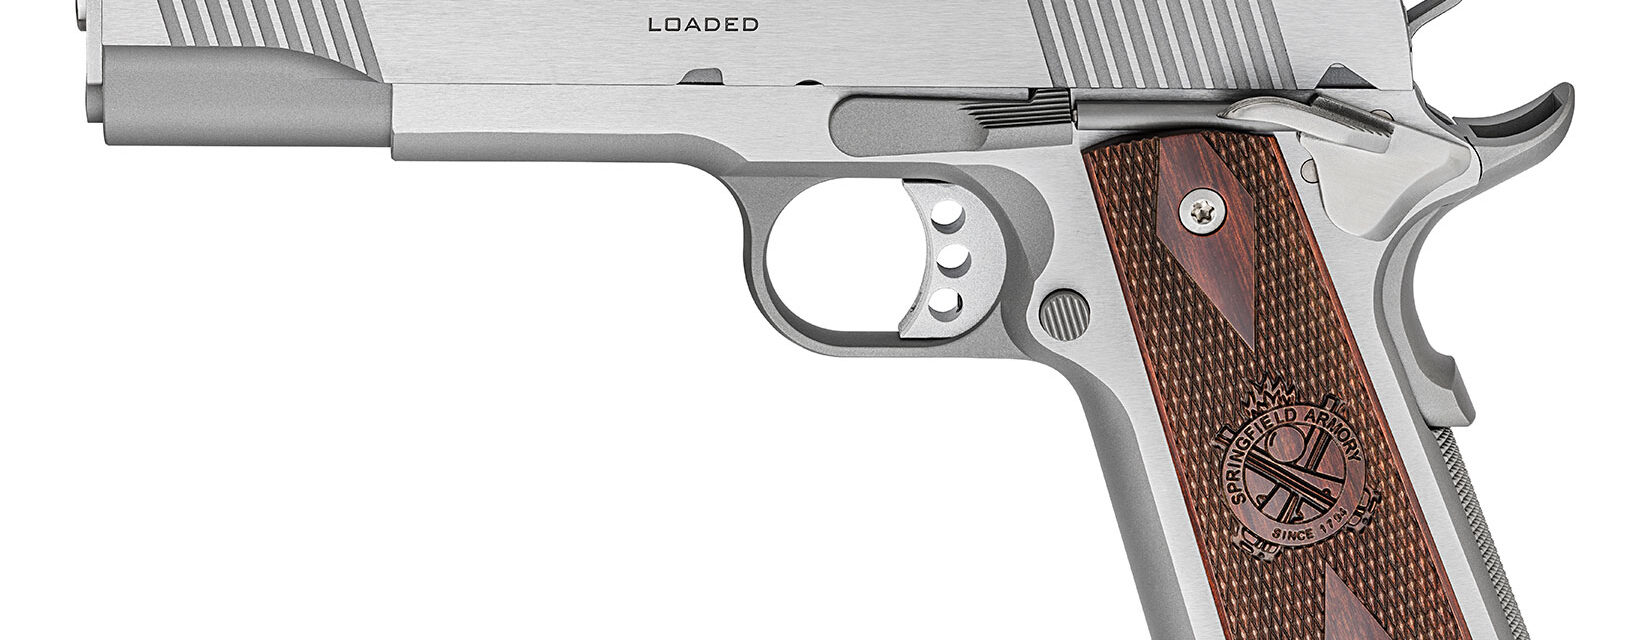 1911 Loaded 45 Acp Stainless Ca Compliant 4